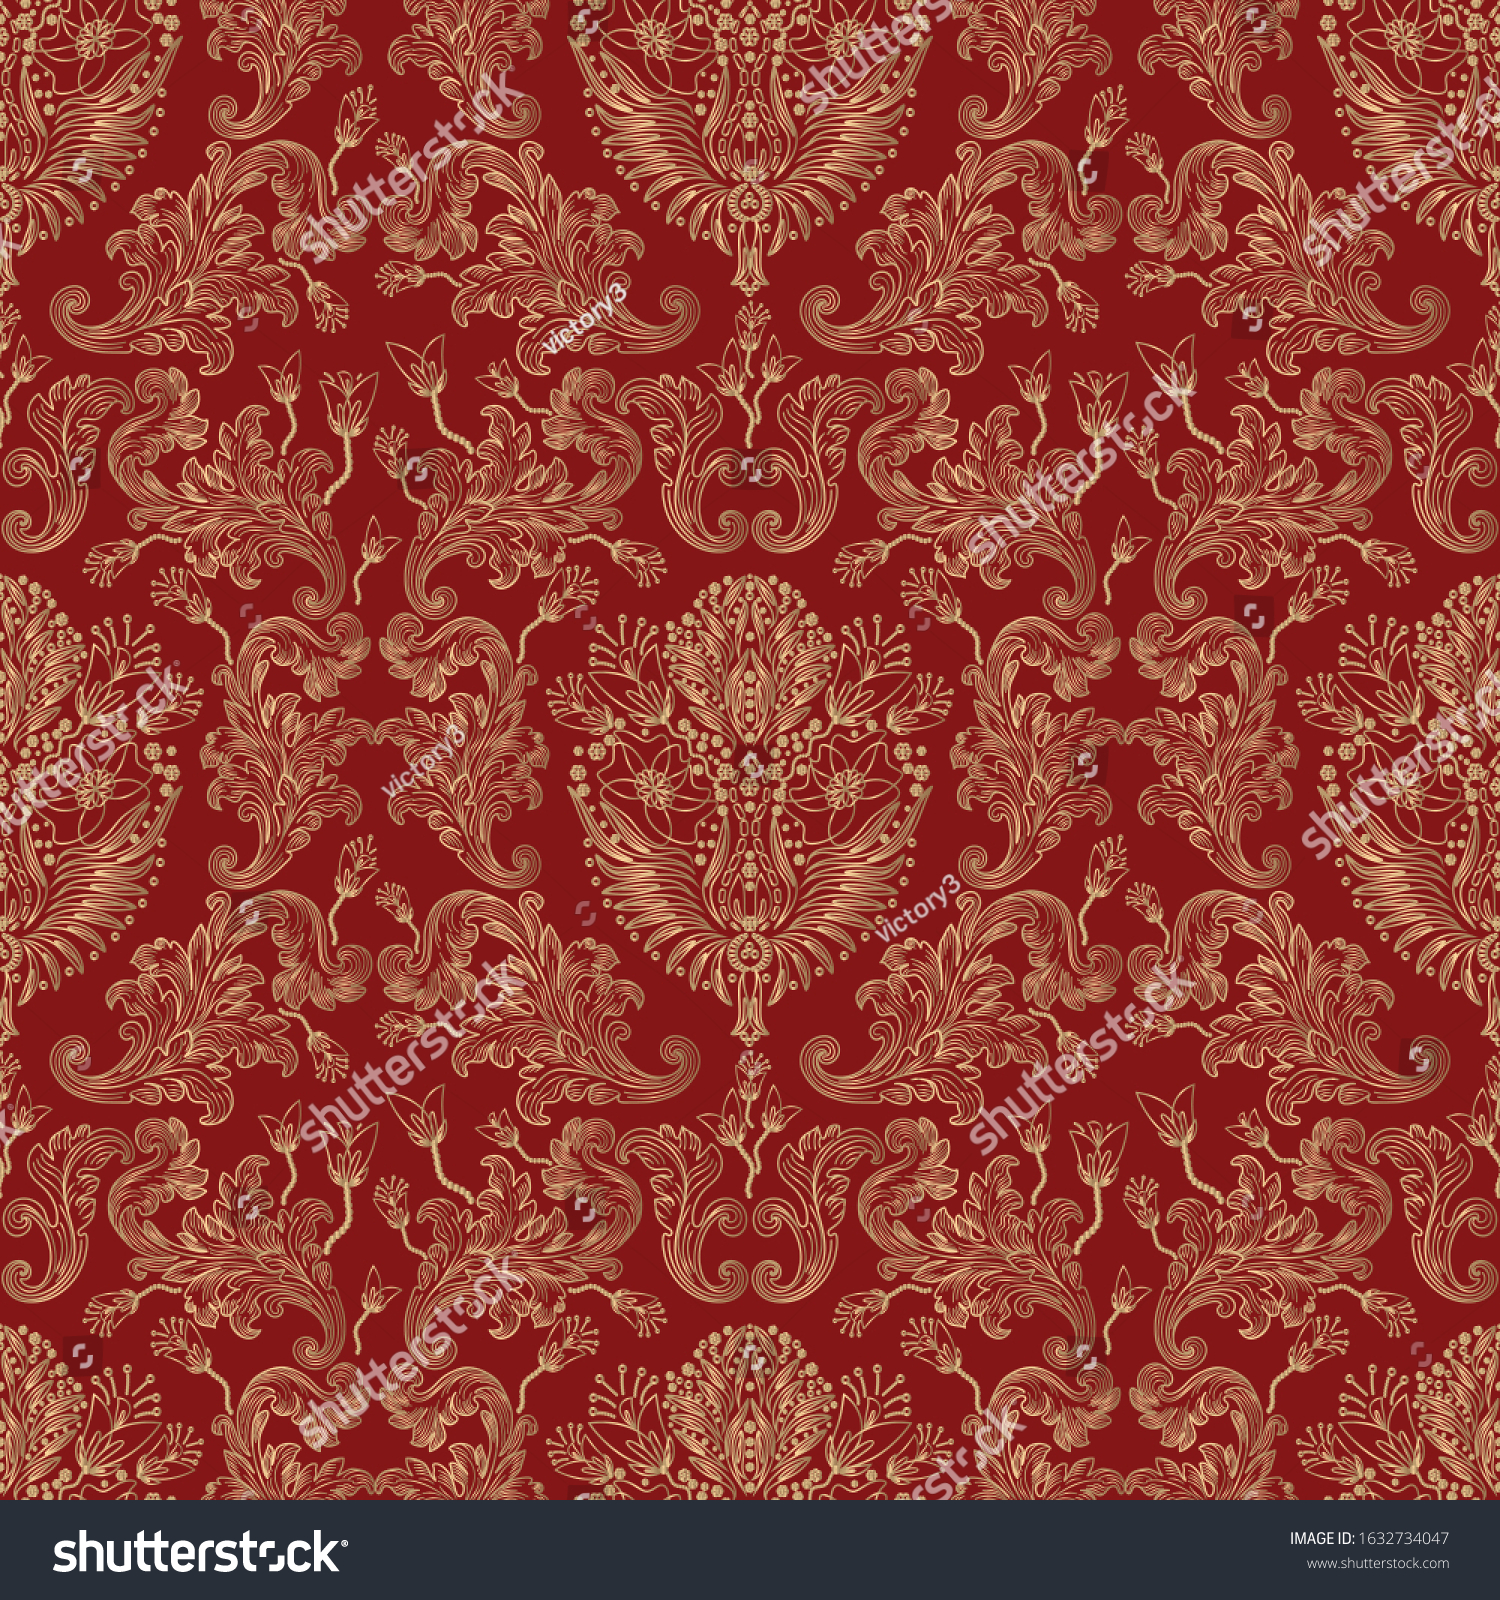 Seamless Floral Pattern Gold Wallpaper Fabric Stock Vector Royalty Free 1632734047